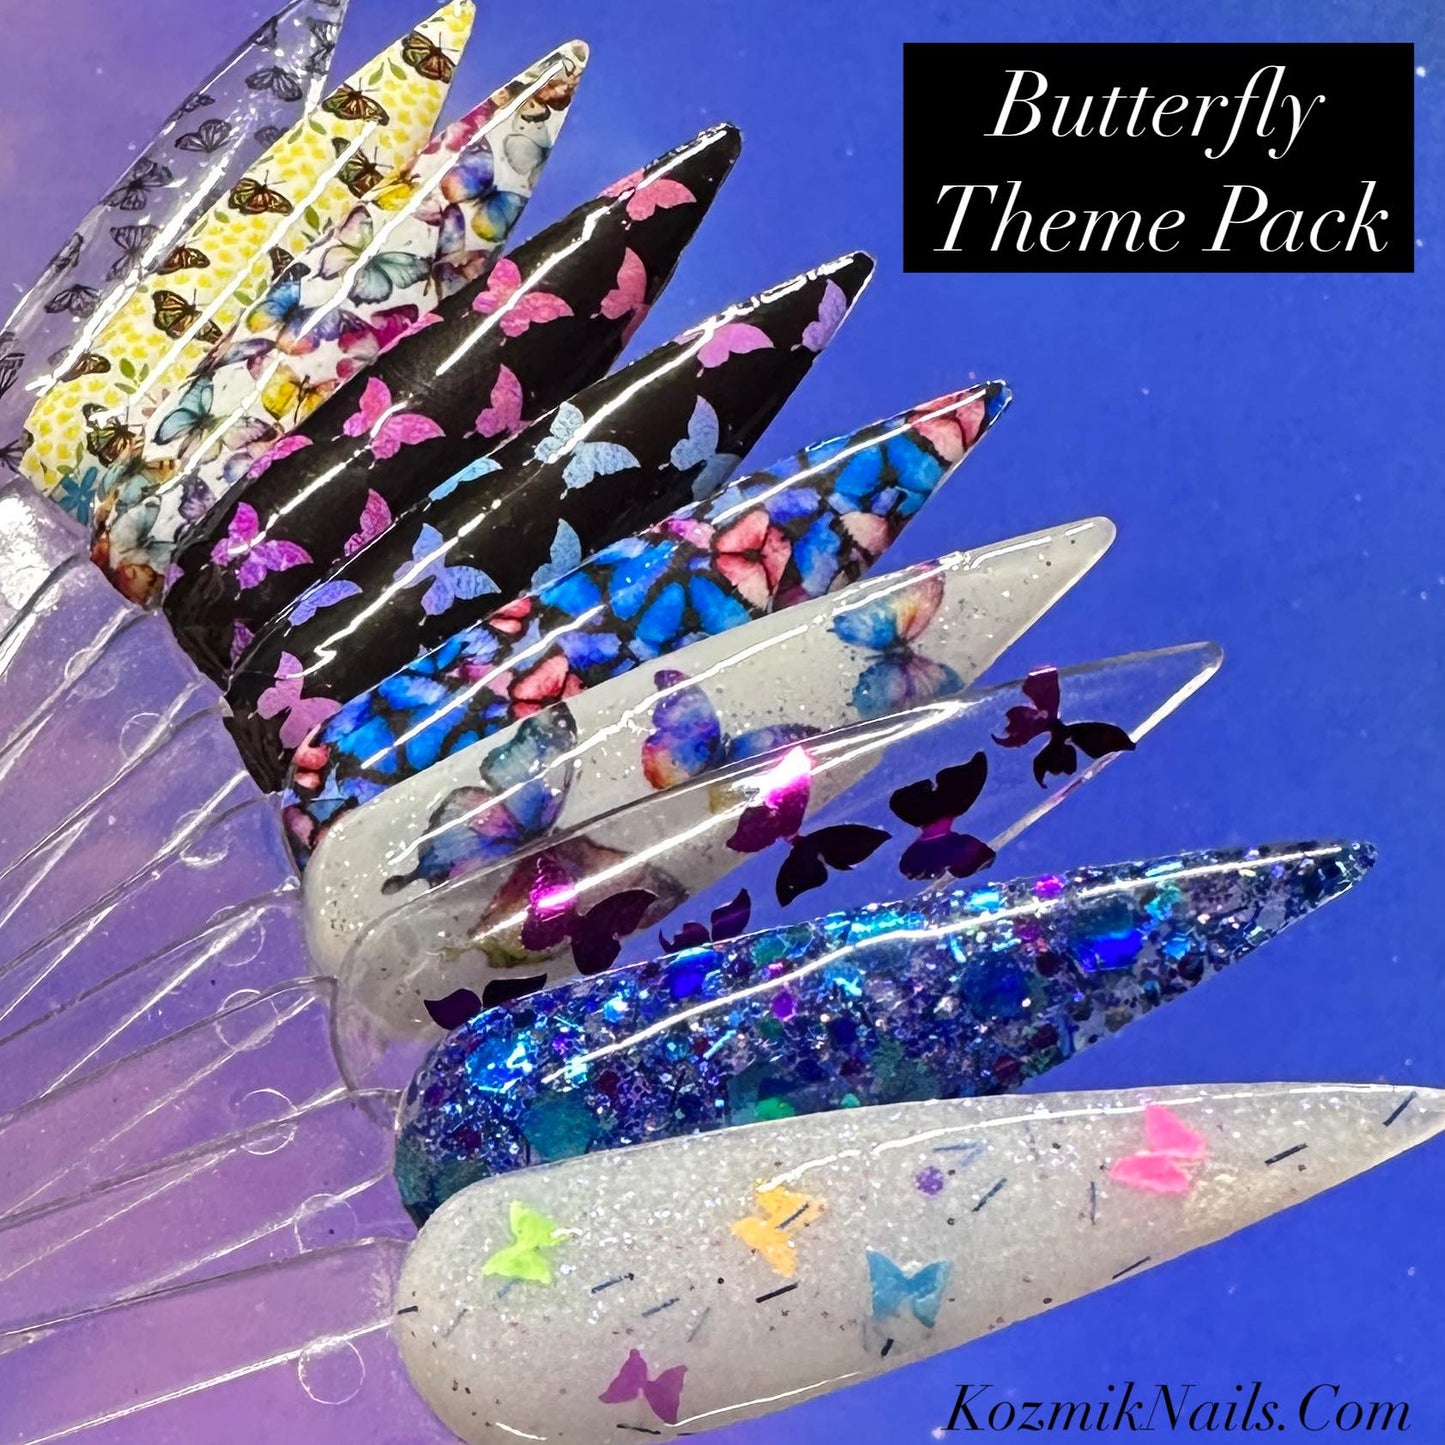 Butterfly Theme Pack